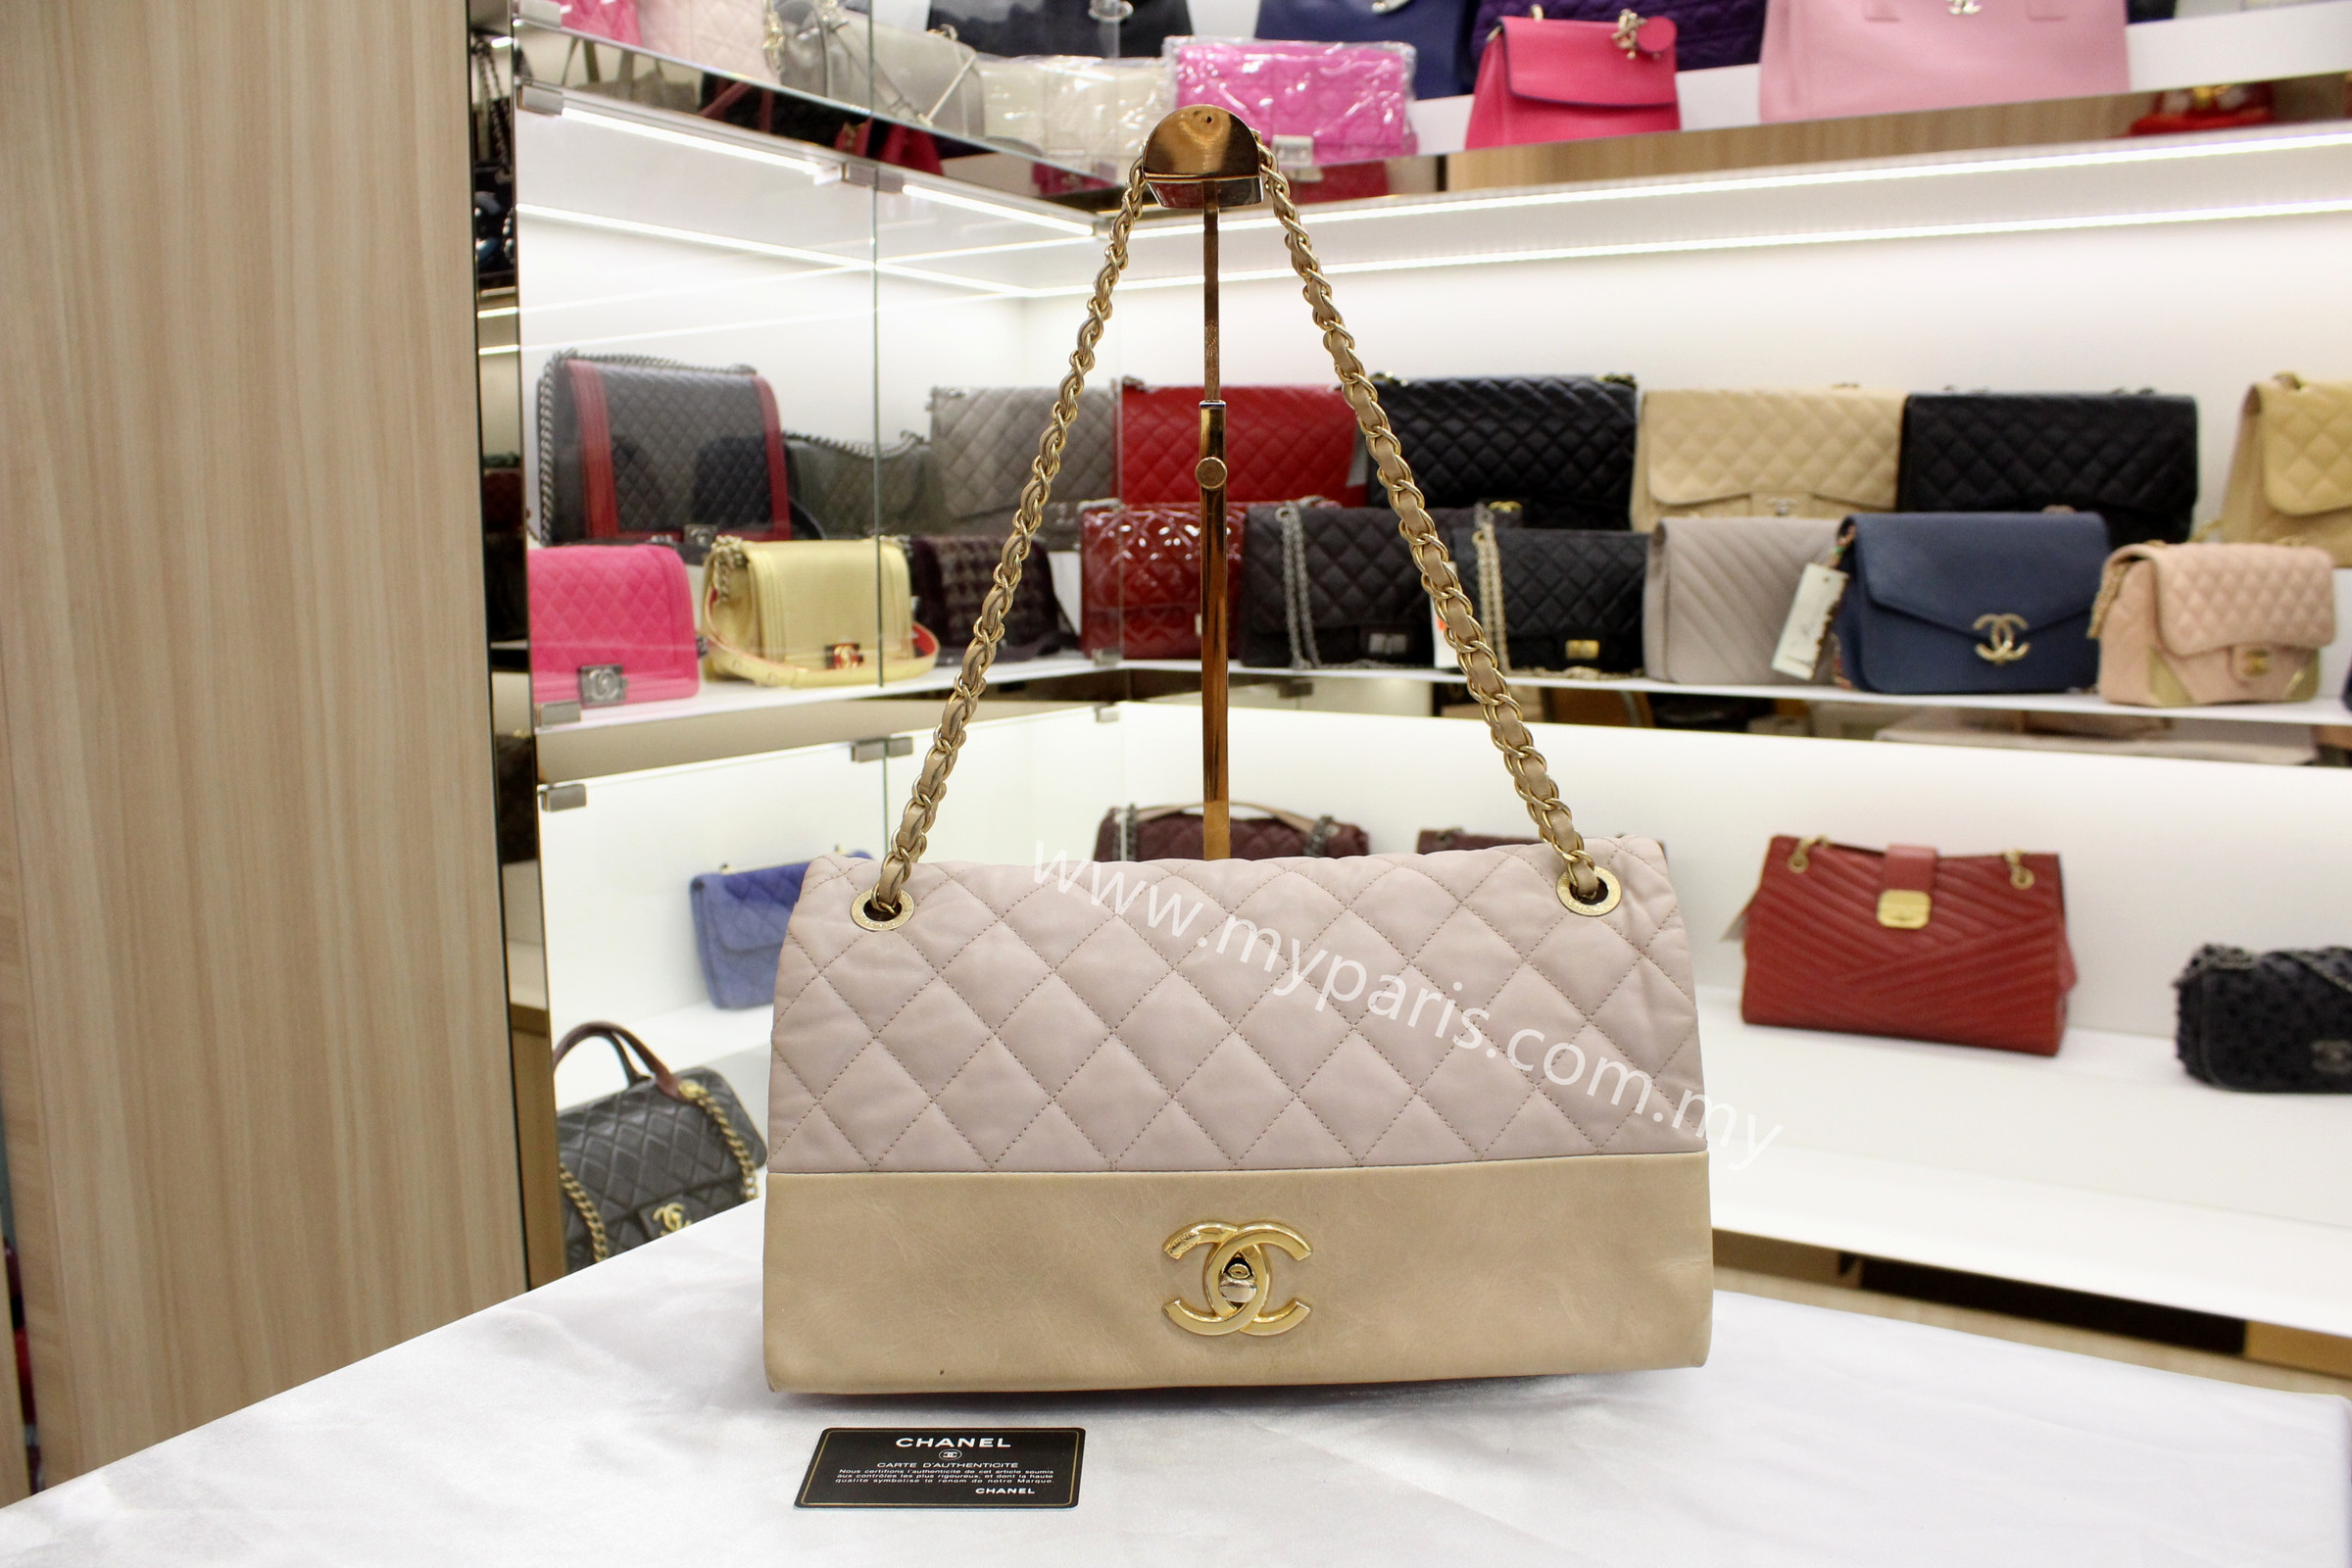 Chanel Pink Calf Leather Flap Bag – My Paris Branded Station-Sell Your Bags And Get Instant Cash